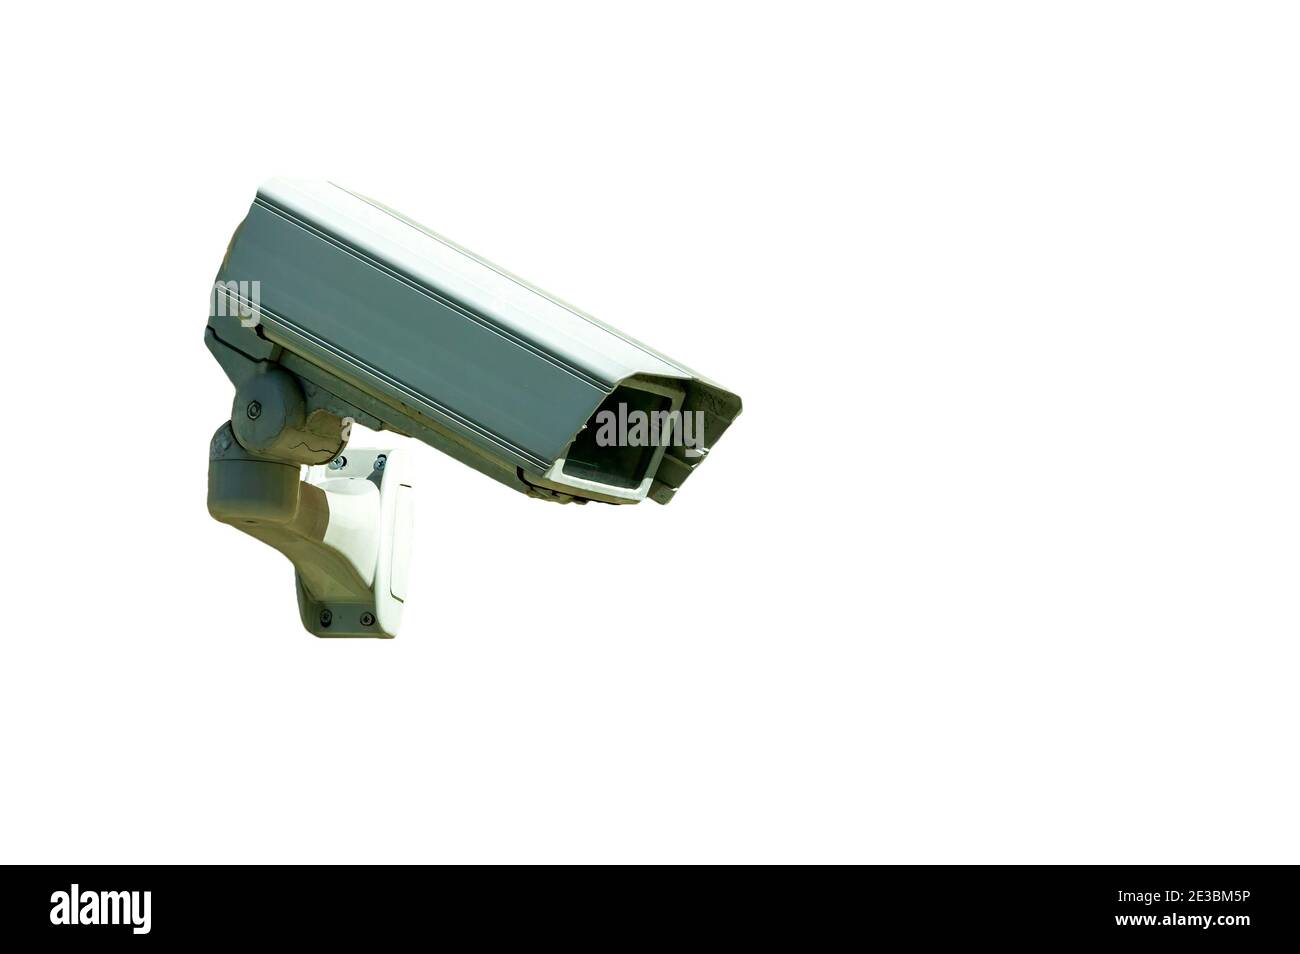 CCTV security camera system being used for surveillance cut out and isolated on a white background, stock photo image Stock Photo